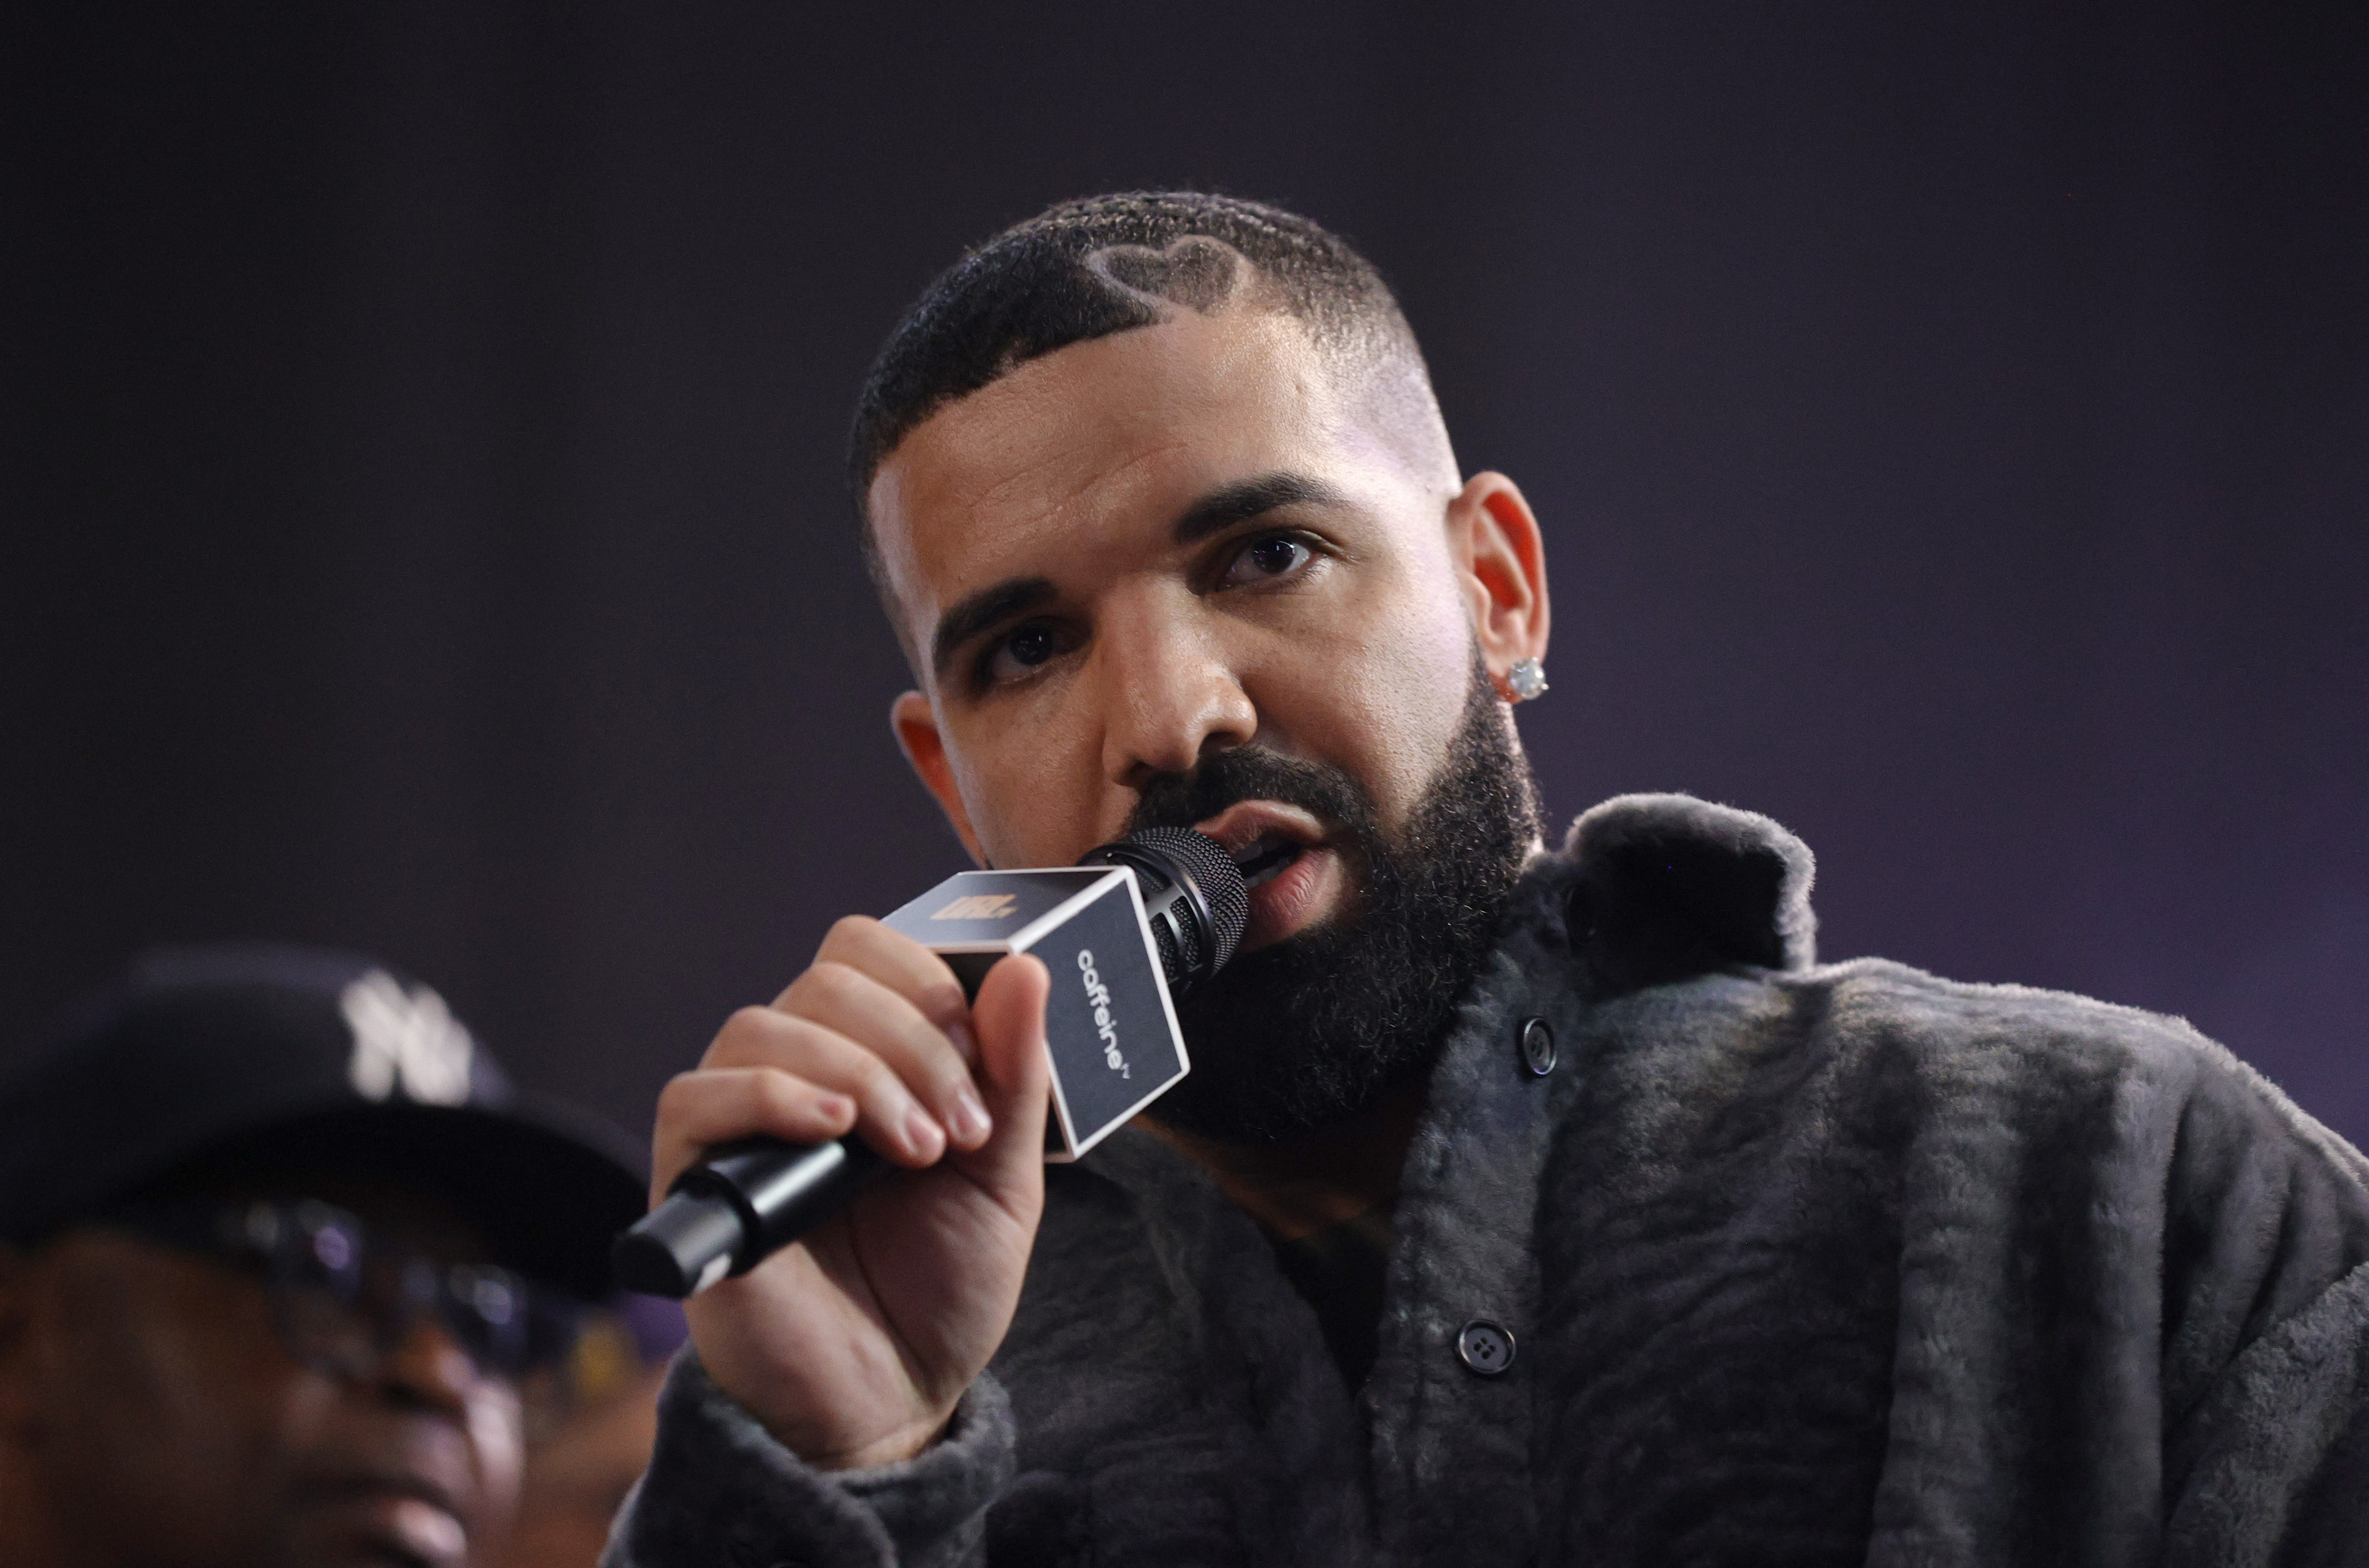 Drake Reveals His New Radio Show “Table For One” Debuts Tonight